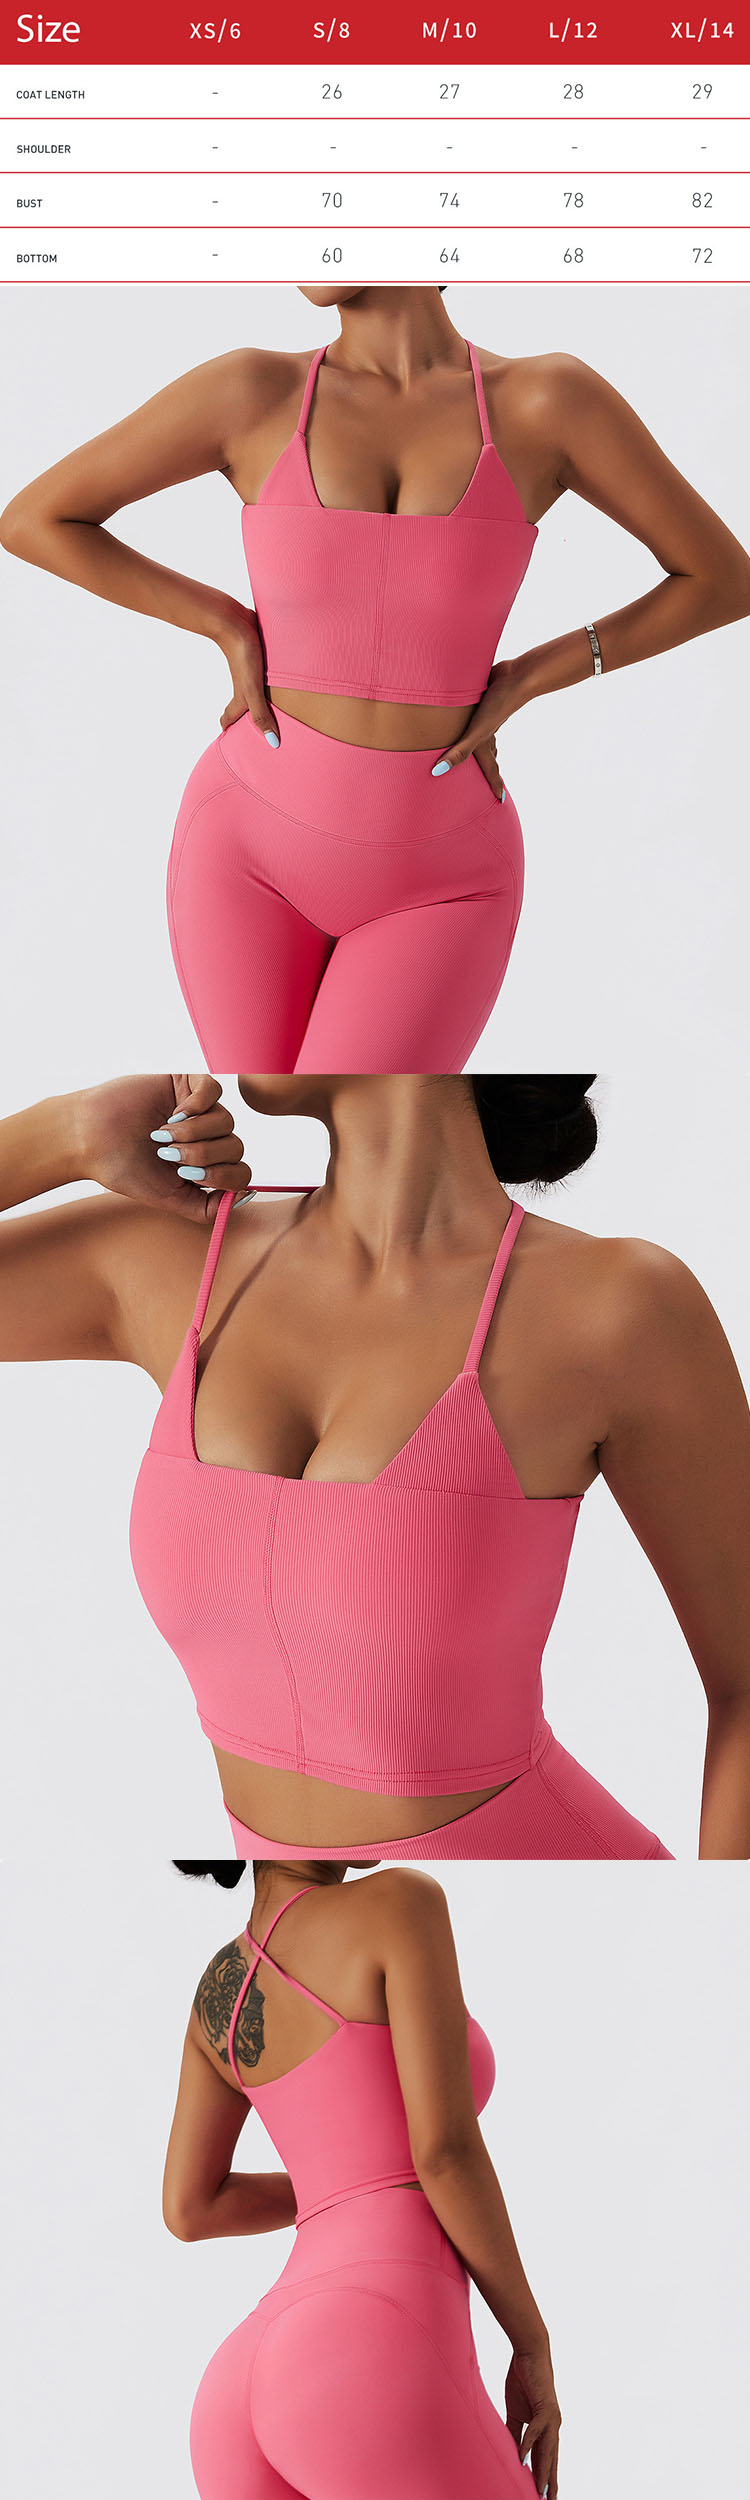 The thin band splits the chest area and lengthens the neck line in the best sports bra